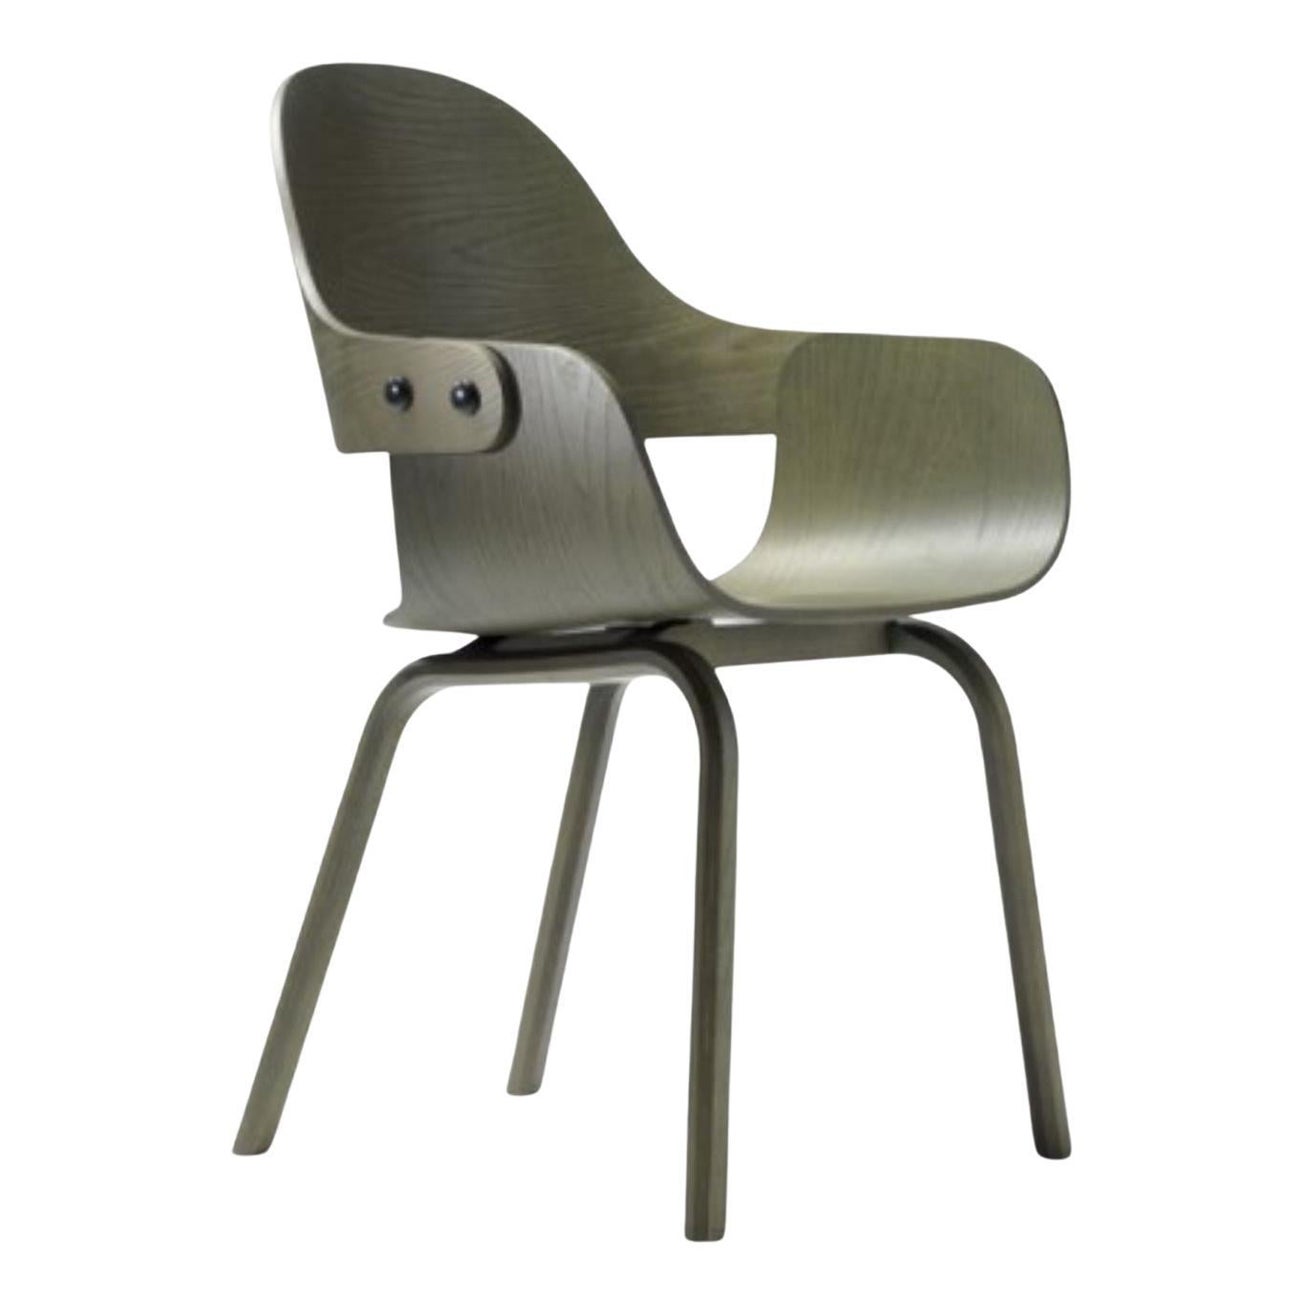 Show Time Nude 4 Legs Chair Green by Jaime Hayon